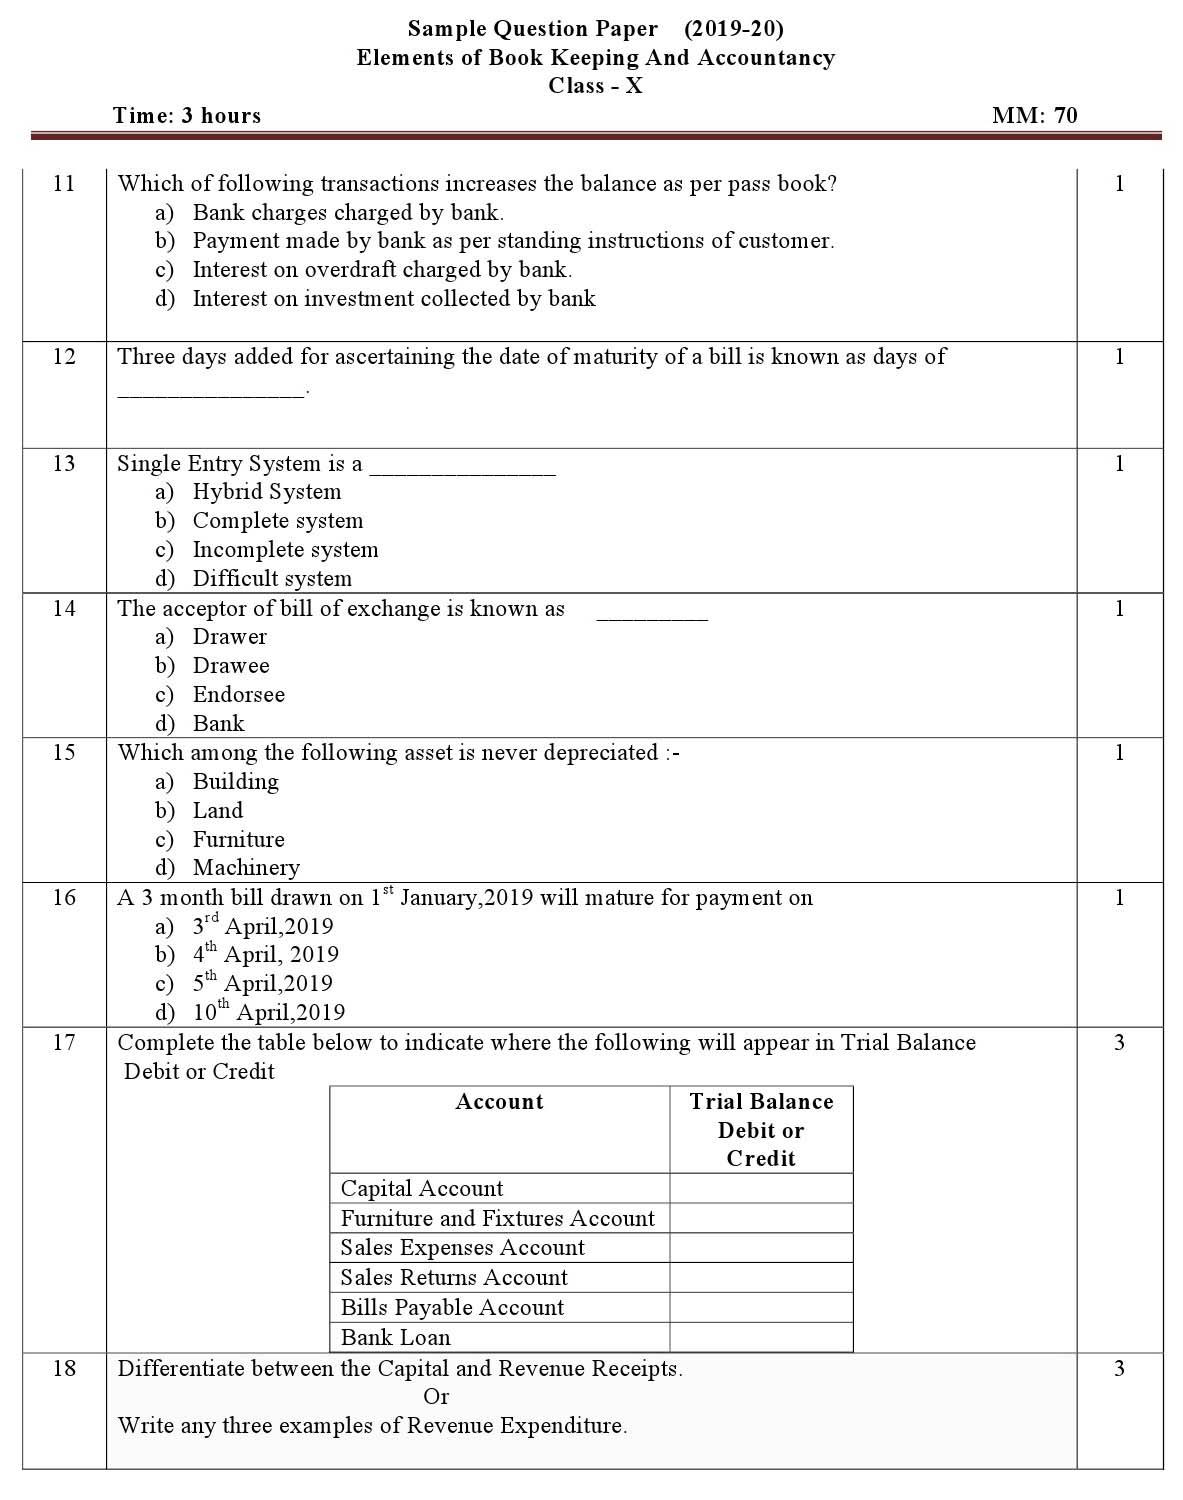 Elements of Book Keeping And Accountancy CBSE Class X Sample Question Paper 2019 20 - Image 2